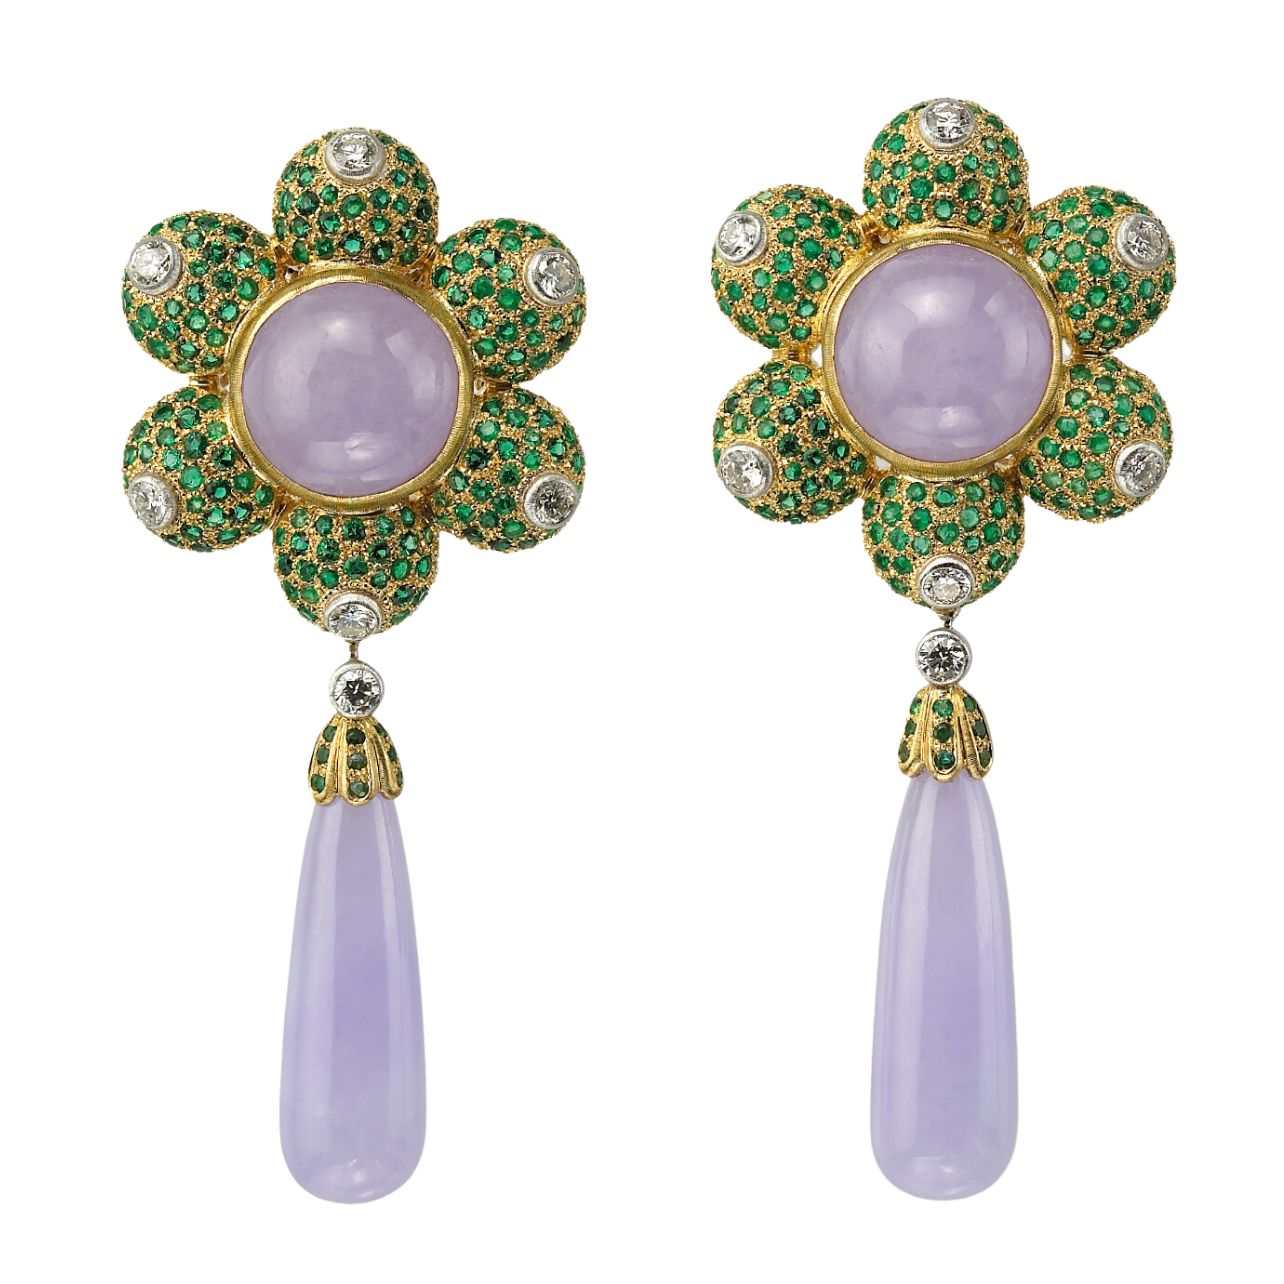 Colored cocktail earrings in 18k yellow and white gold set with jade, emeralds, and diamonds.